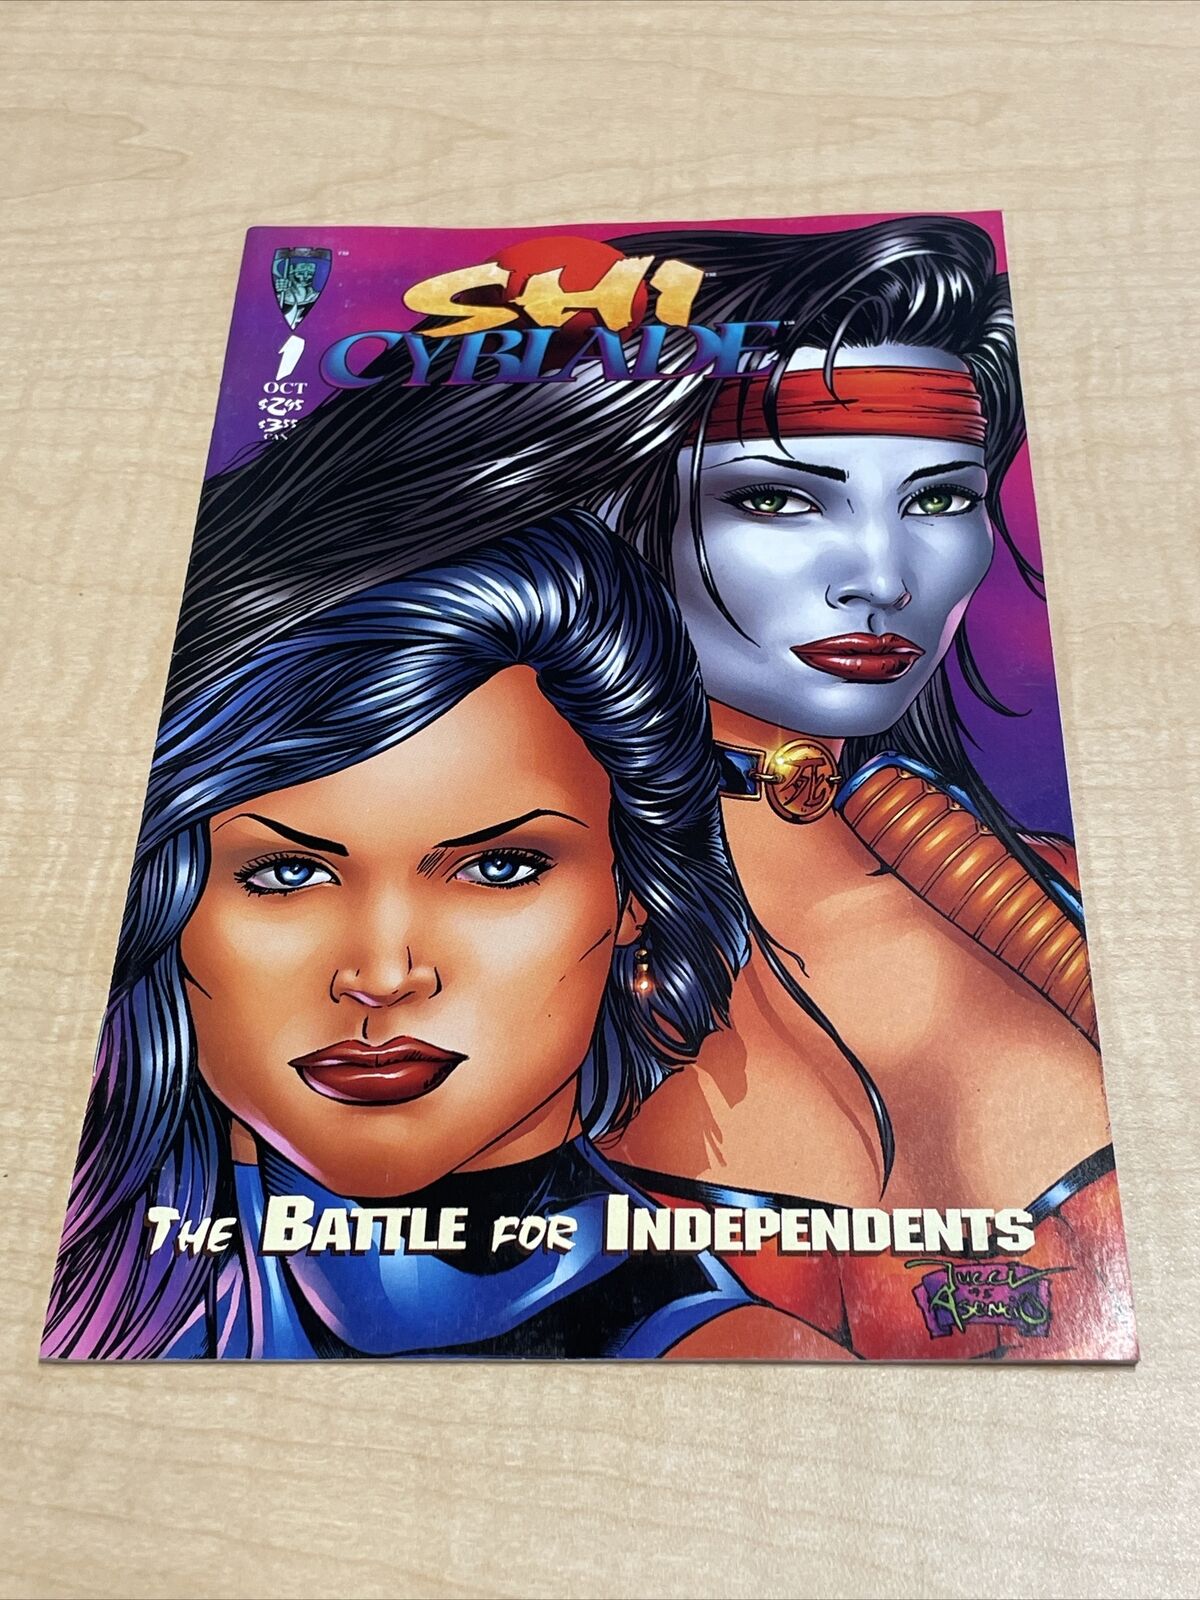 Shi Cyblade The Battle for Independents Issue #1 Comic Book KG